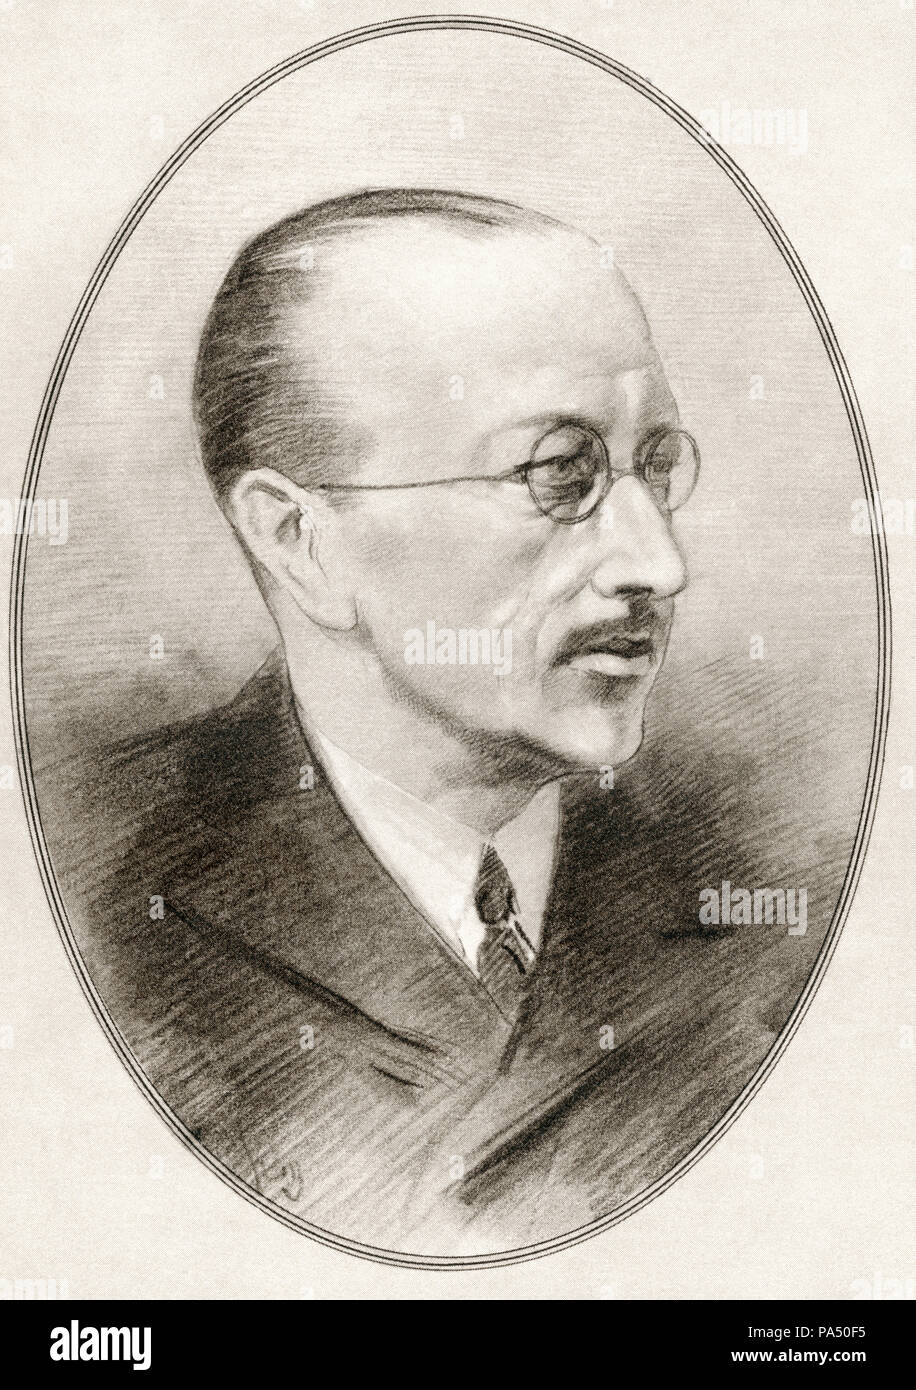 Igor Fyodorovich Stravinsky, 1882 –  1971.  Russian-born composer, pianist, and conductor.  Illustration by Gordon Ross, American artist and illustrator (1873-1946), from Living Biographies of Great Composers. Stock Photo